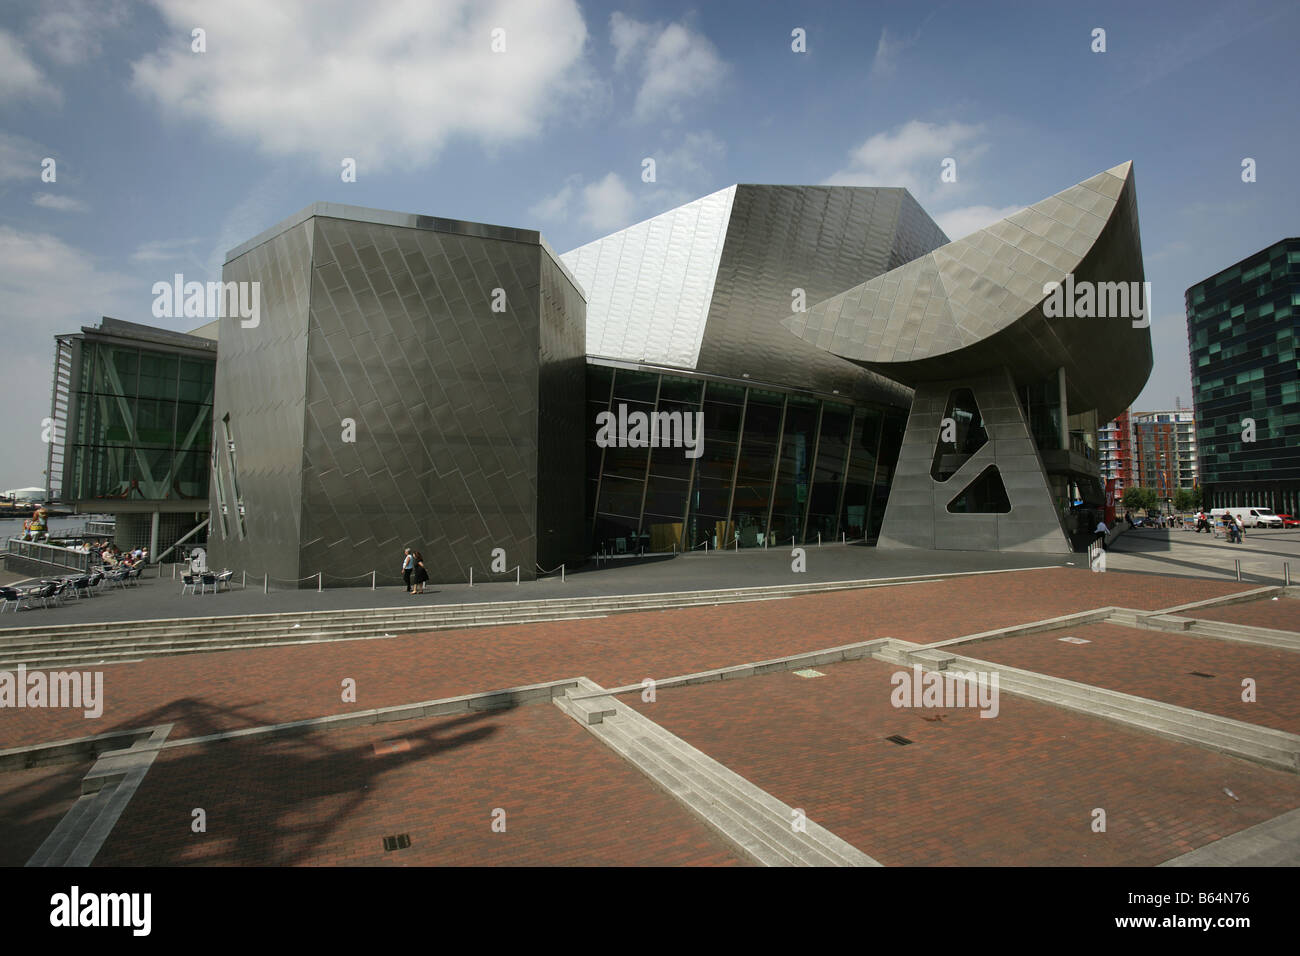 City of Salford, England. The south elevation of the Michael Wilford designed Lowry theatre and art complex in Salford Quays. Stock Photo